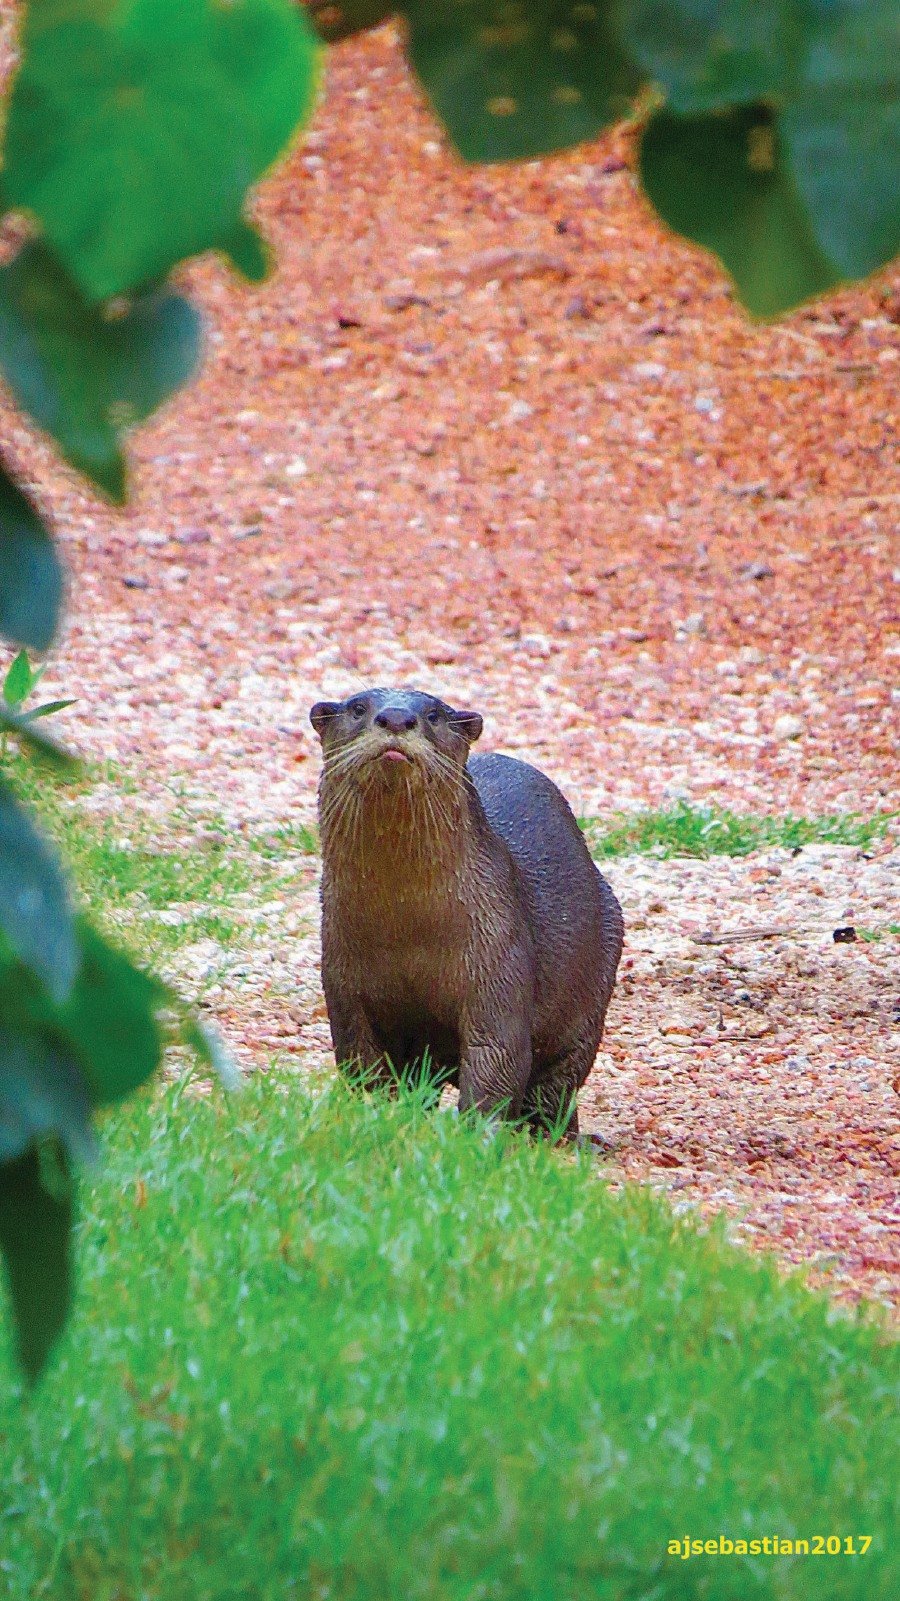  Otters are indicators of whether the quality of water is improving. Picture by Andrew Sebastian 